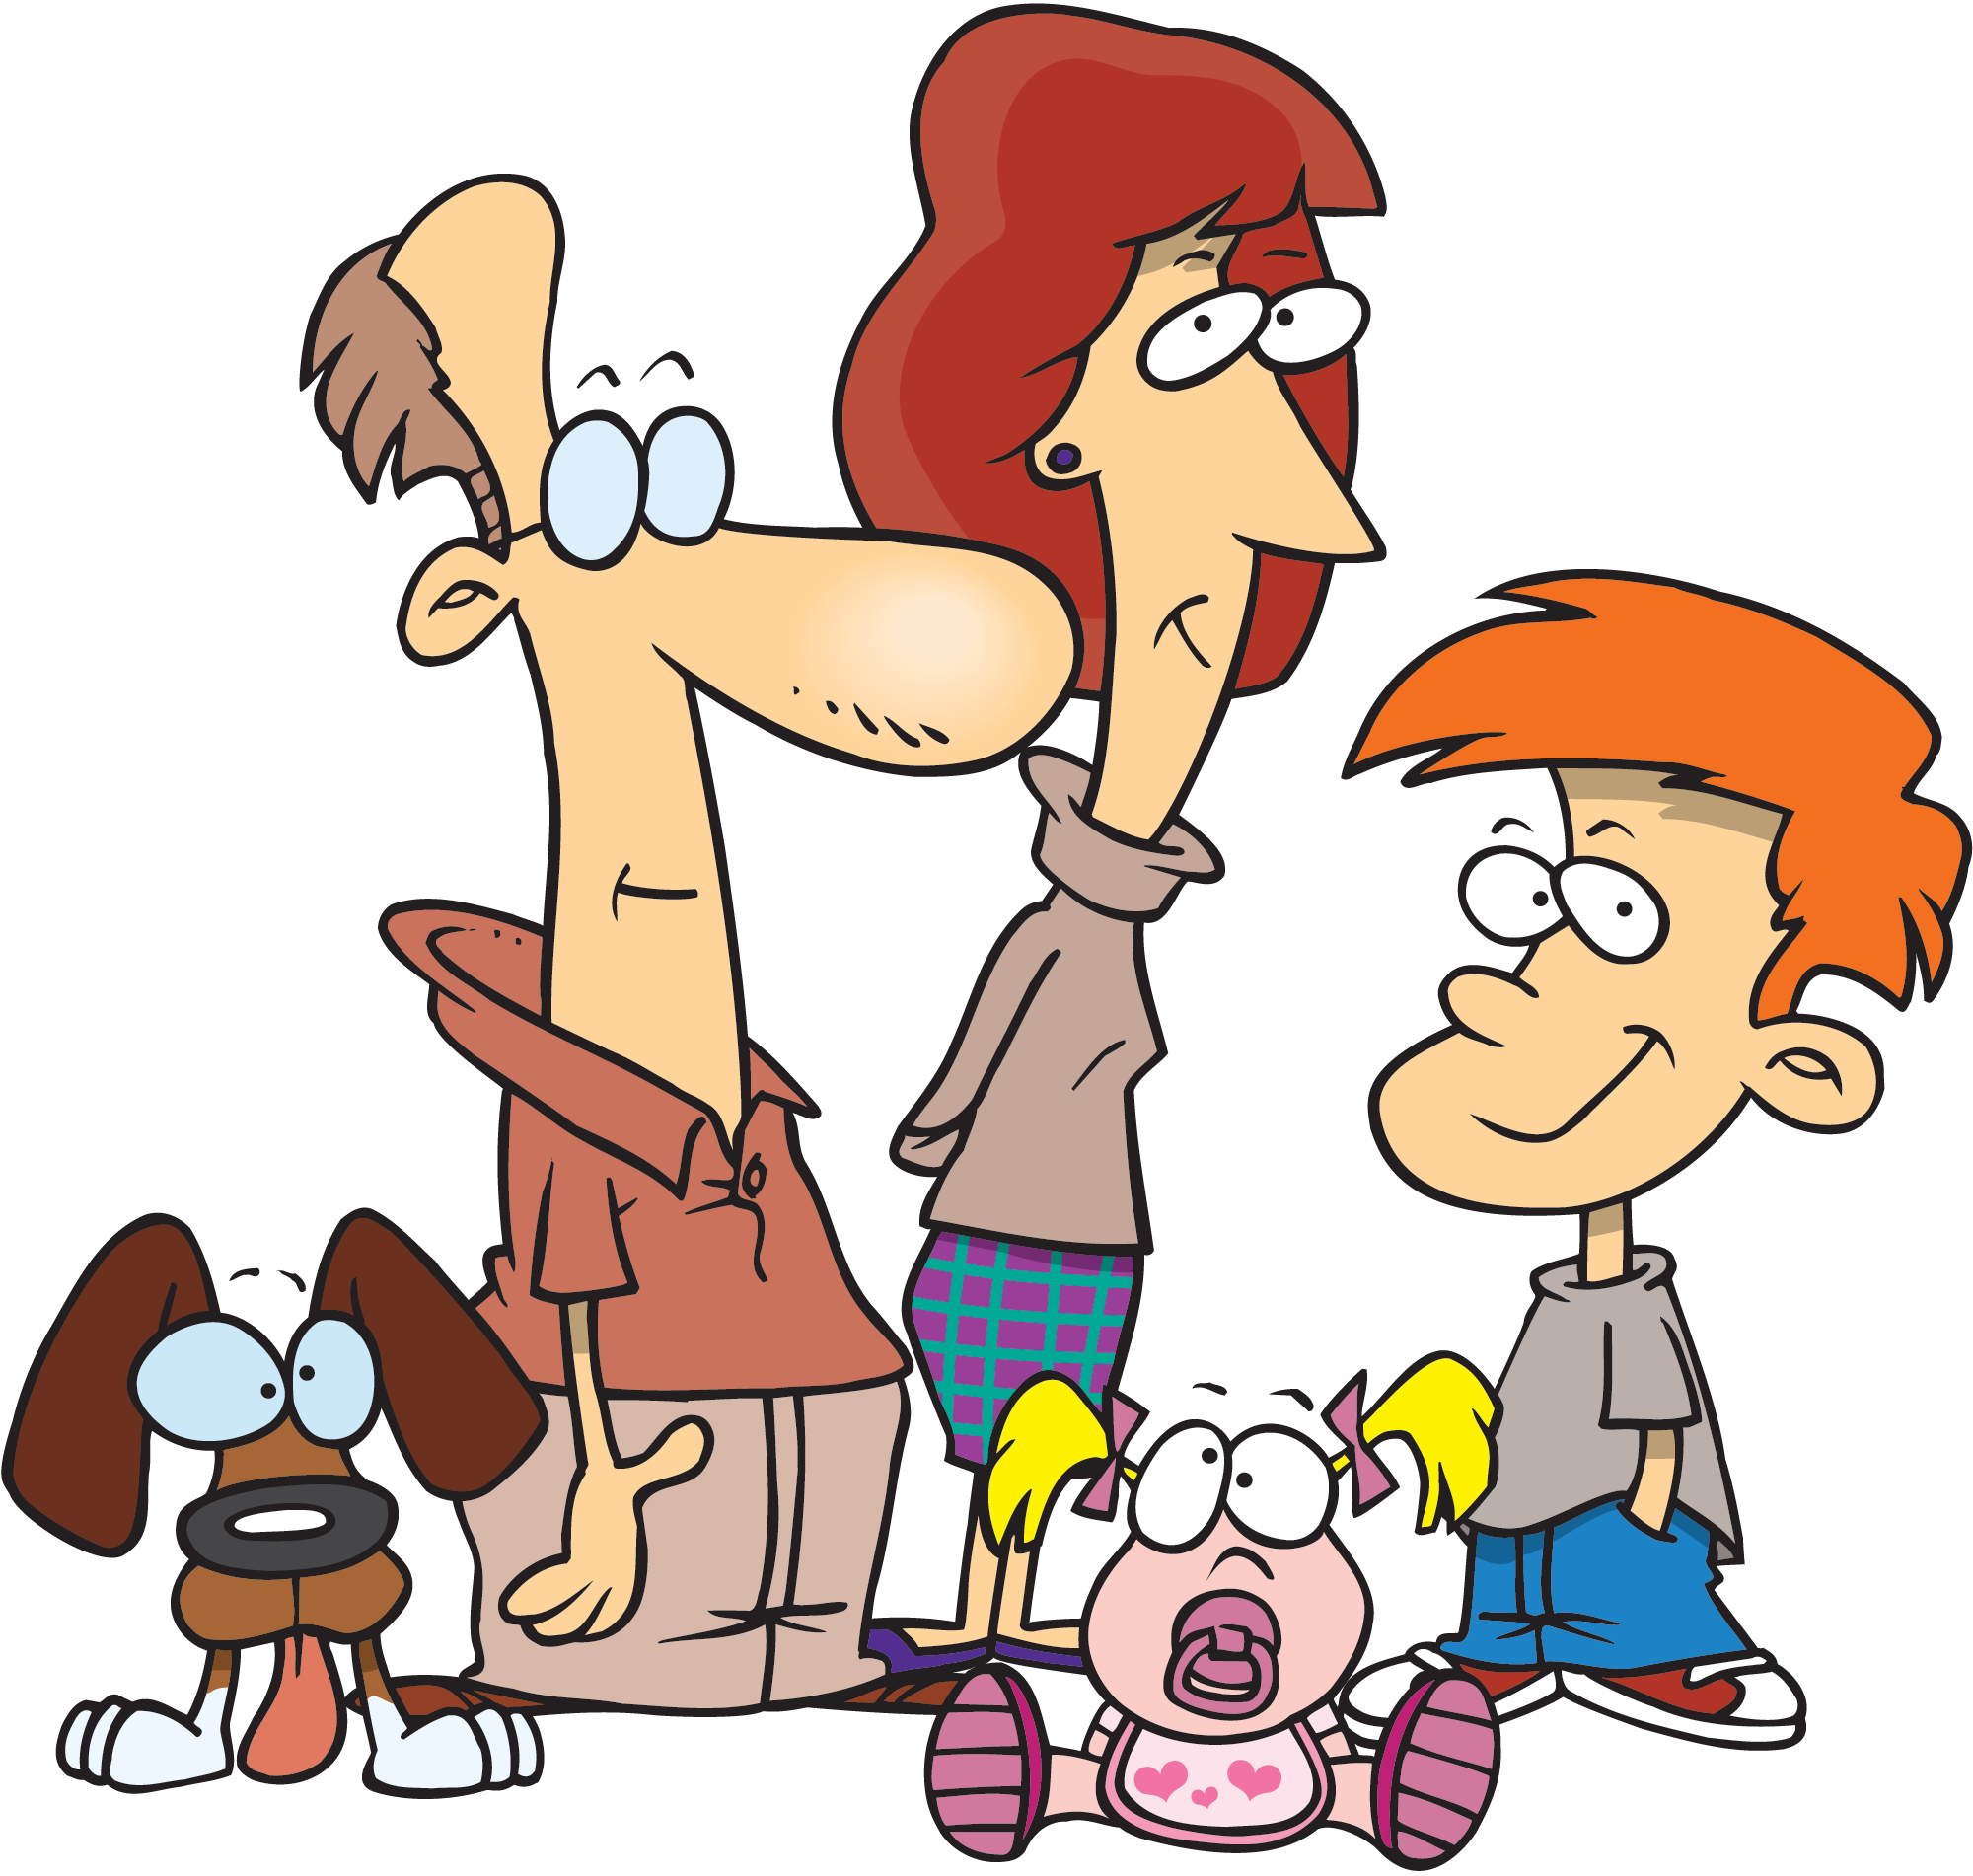 Picture Of A Cartoon Family - Cliparts.co